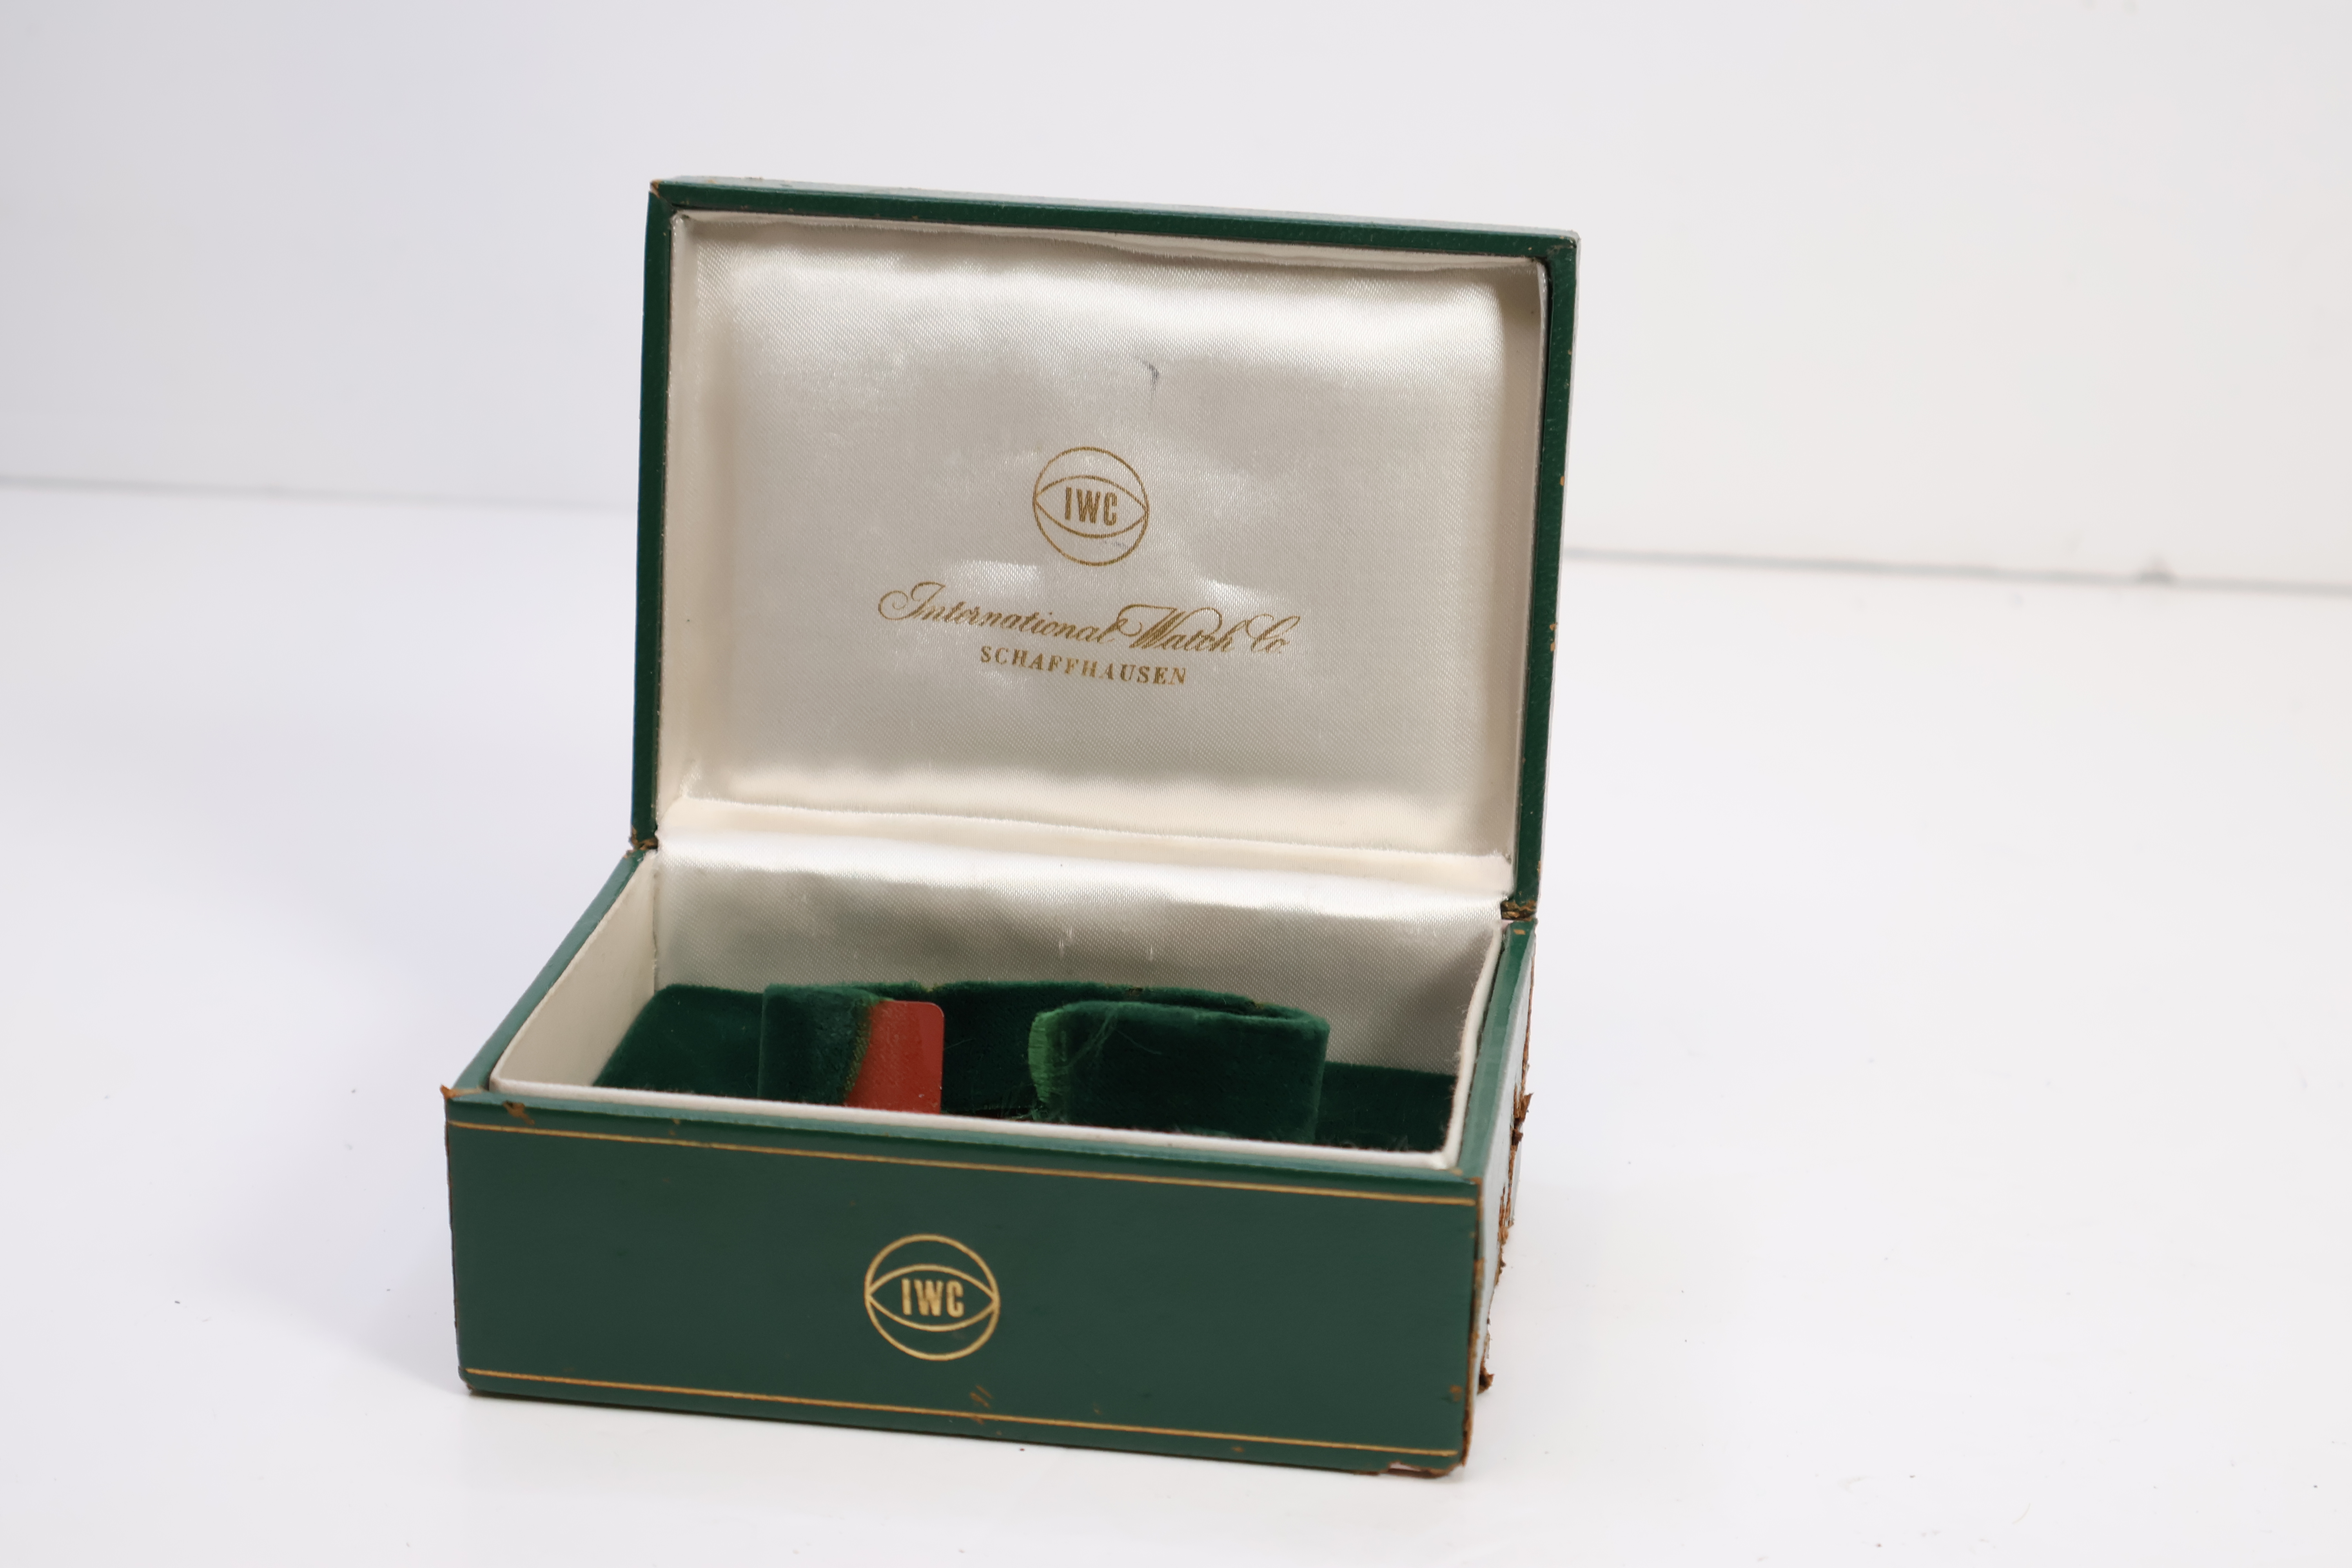 *To Be Sold Without Reserve* IWC Vintage green box - Image 2 of 2